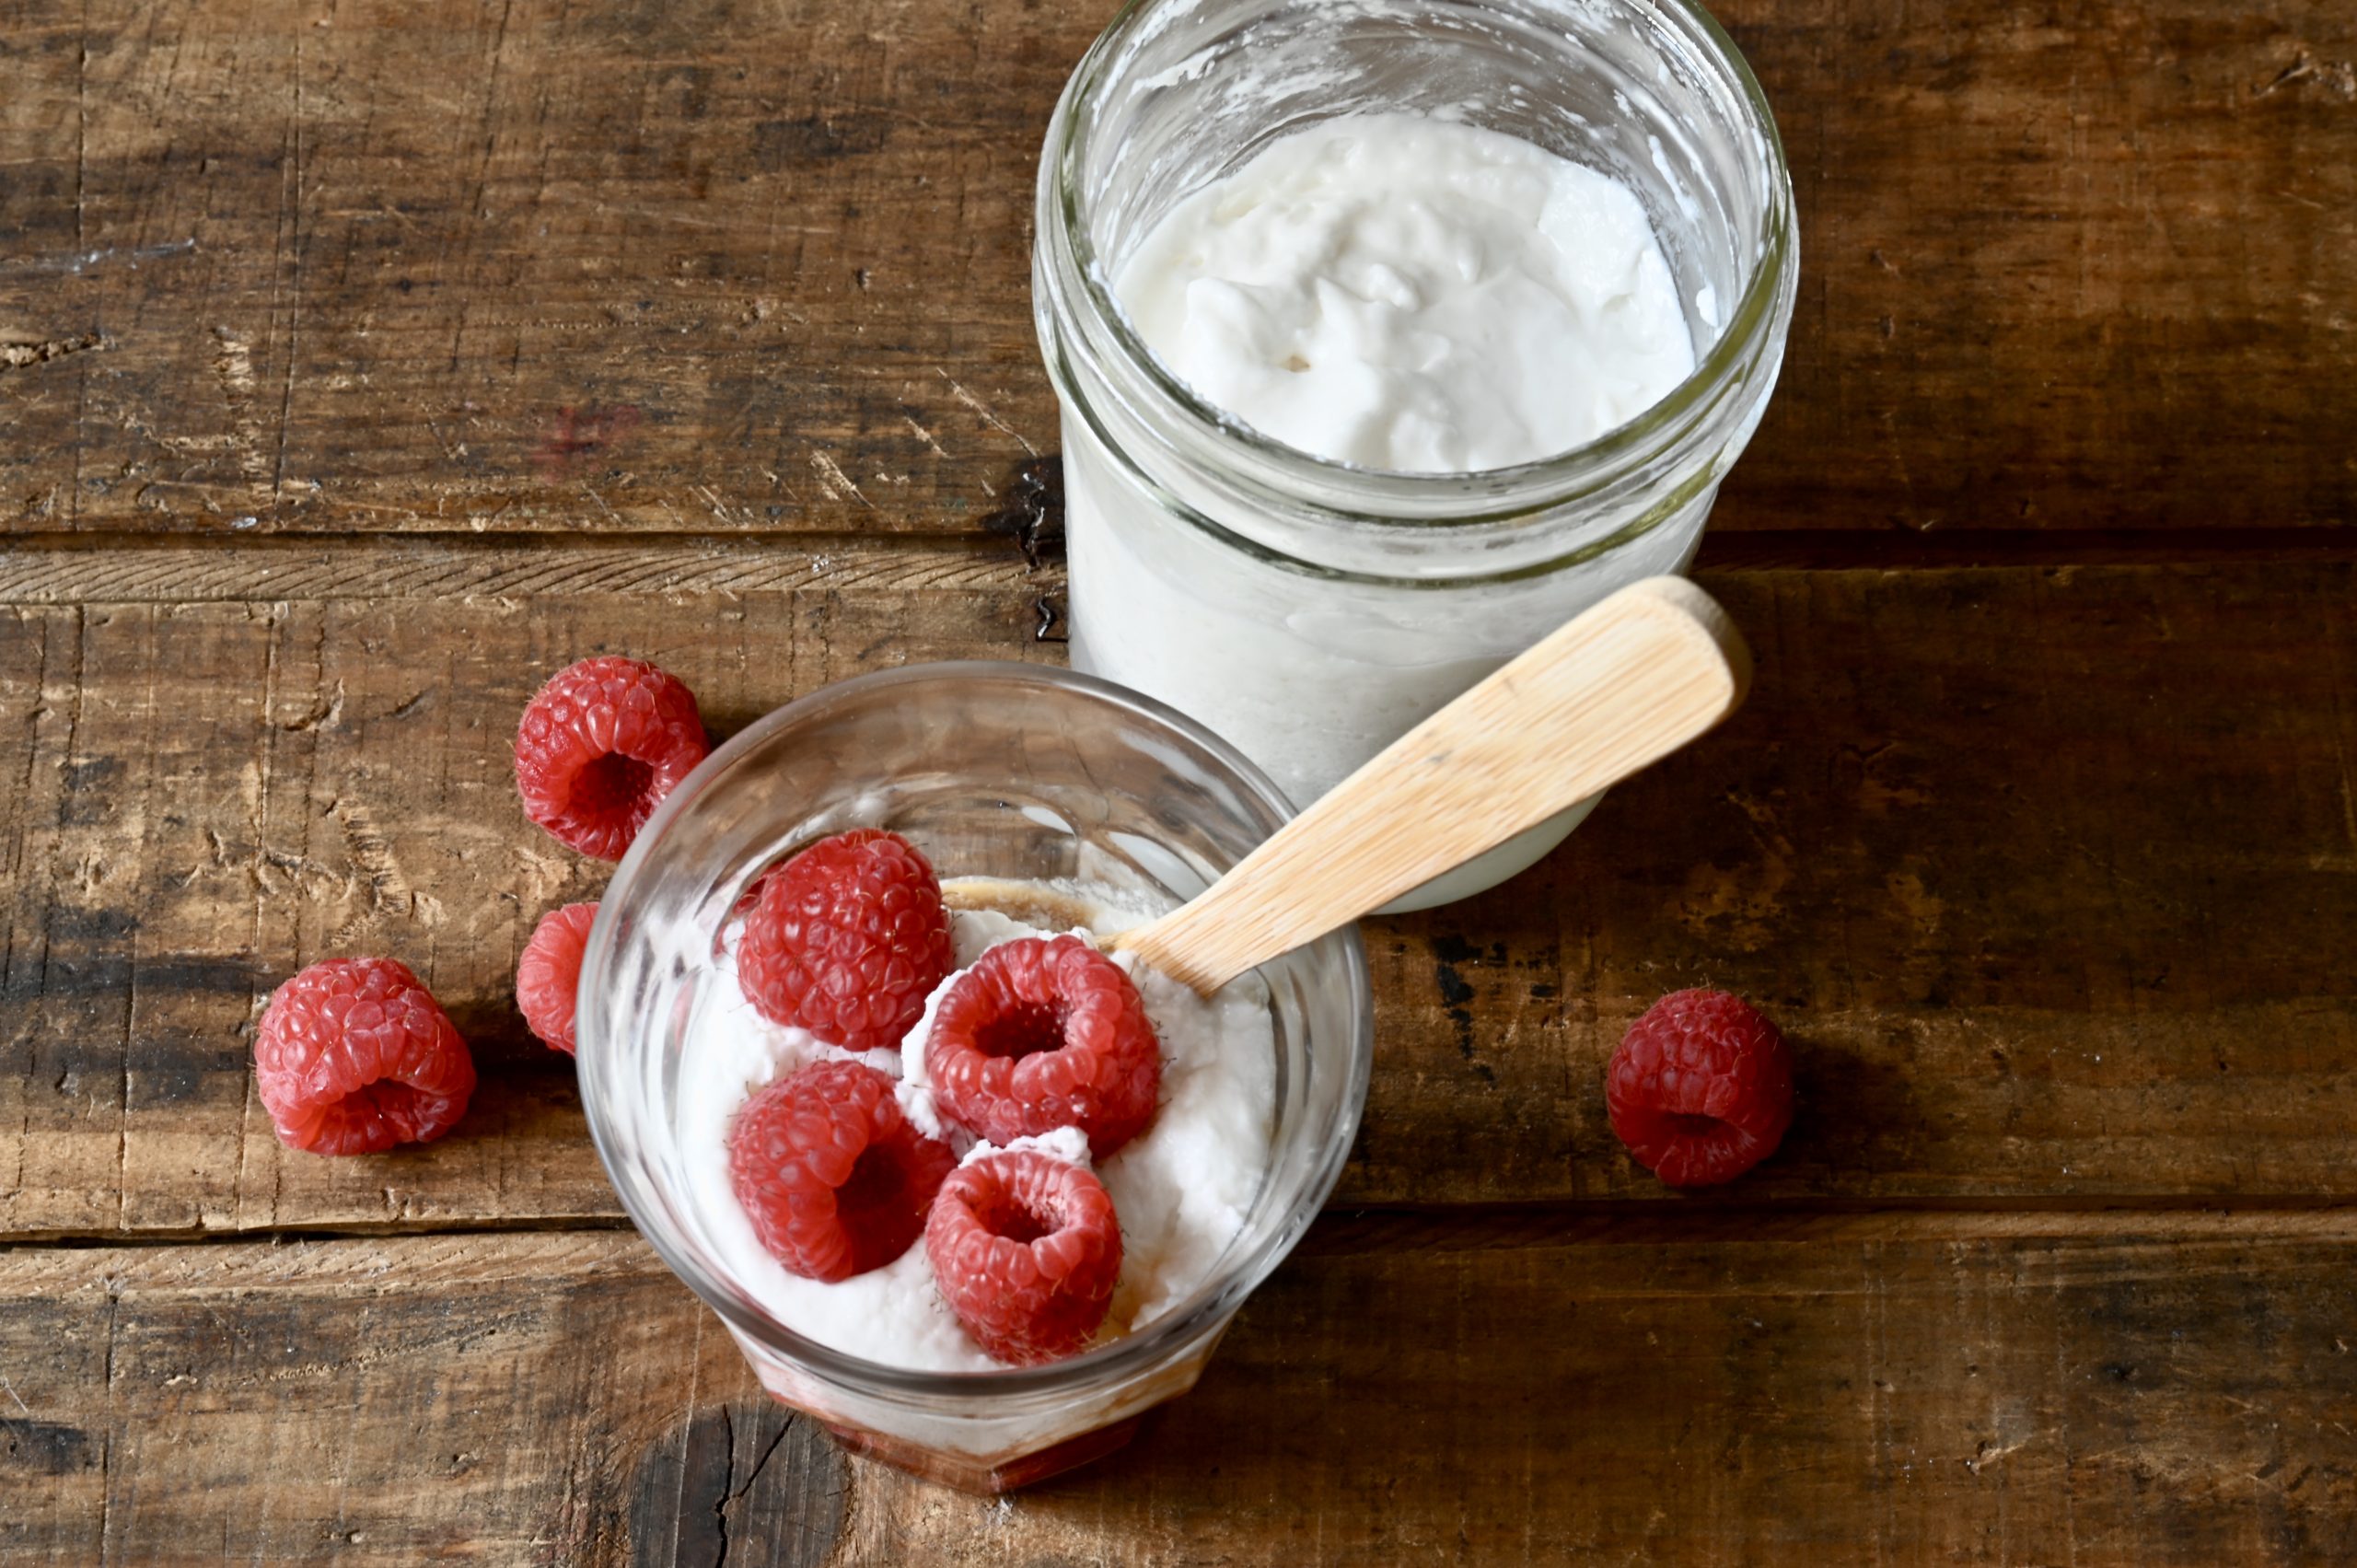 This Coconut Yogurt with Rejuvelac is made with 2 simple ingredients: coconut milk and rejuvelac--that’s it. No yogurt making or commercial probiotics!